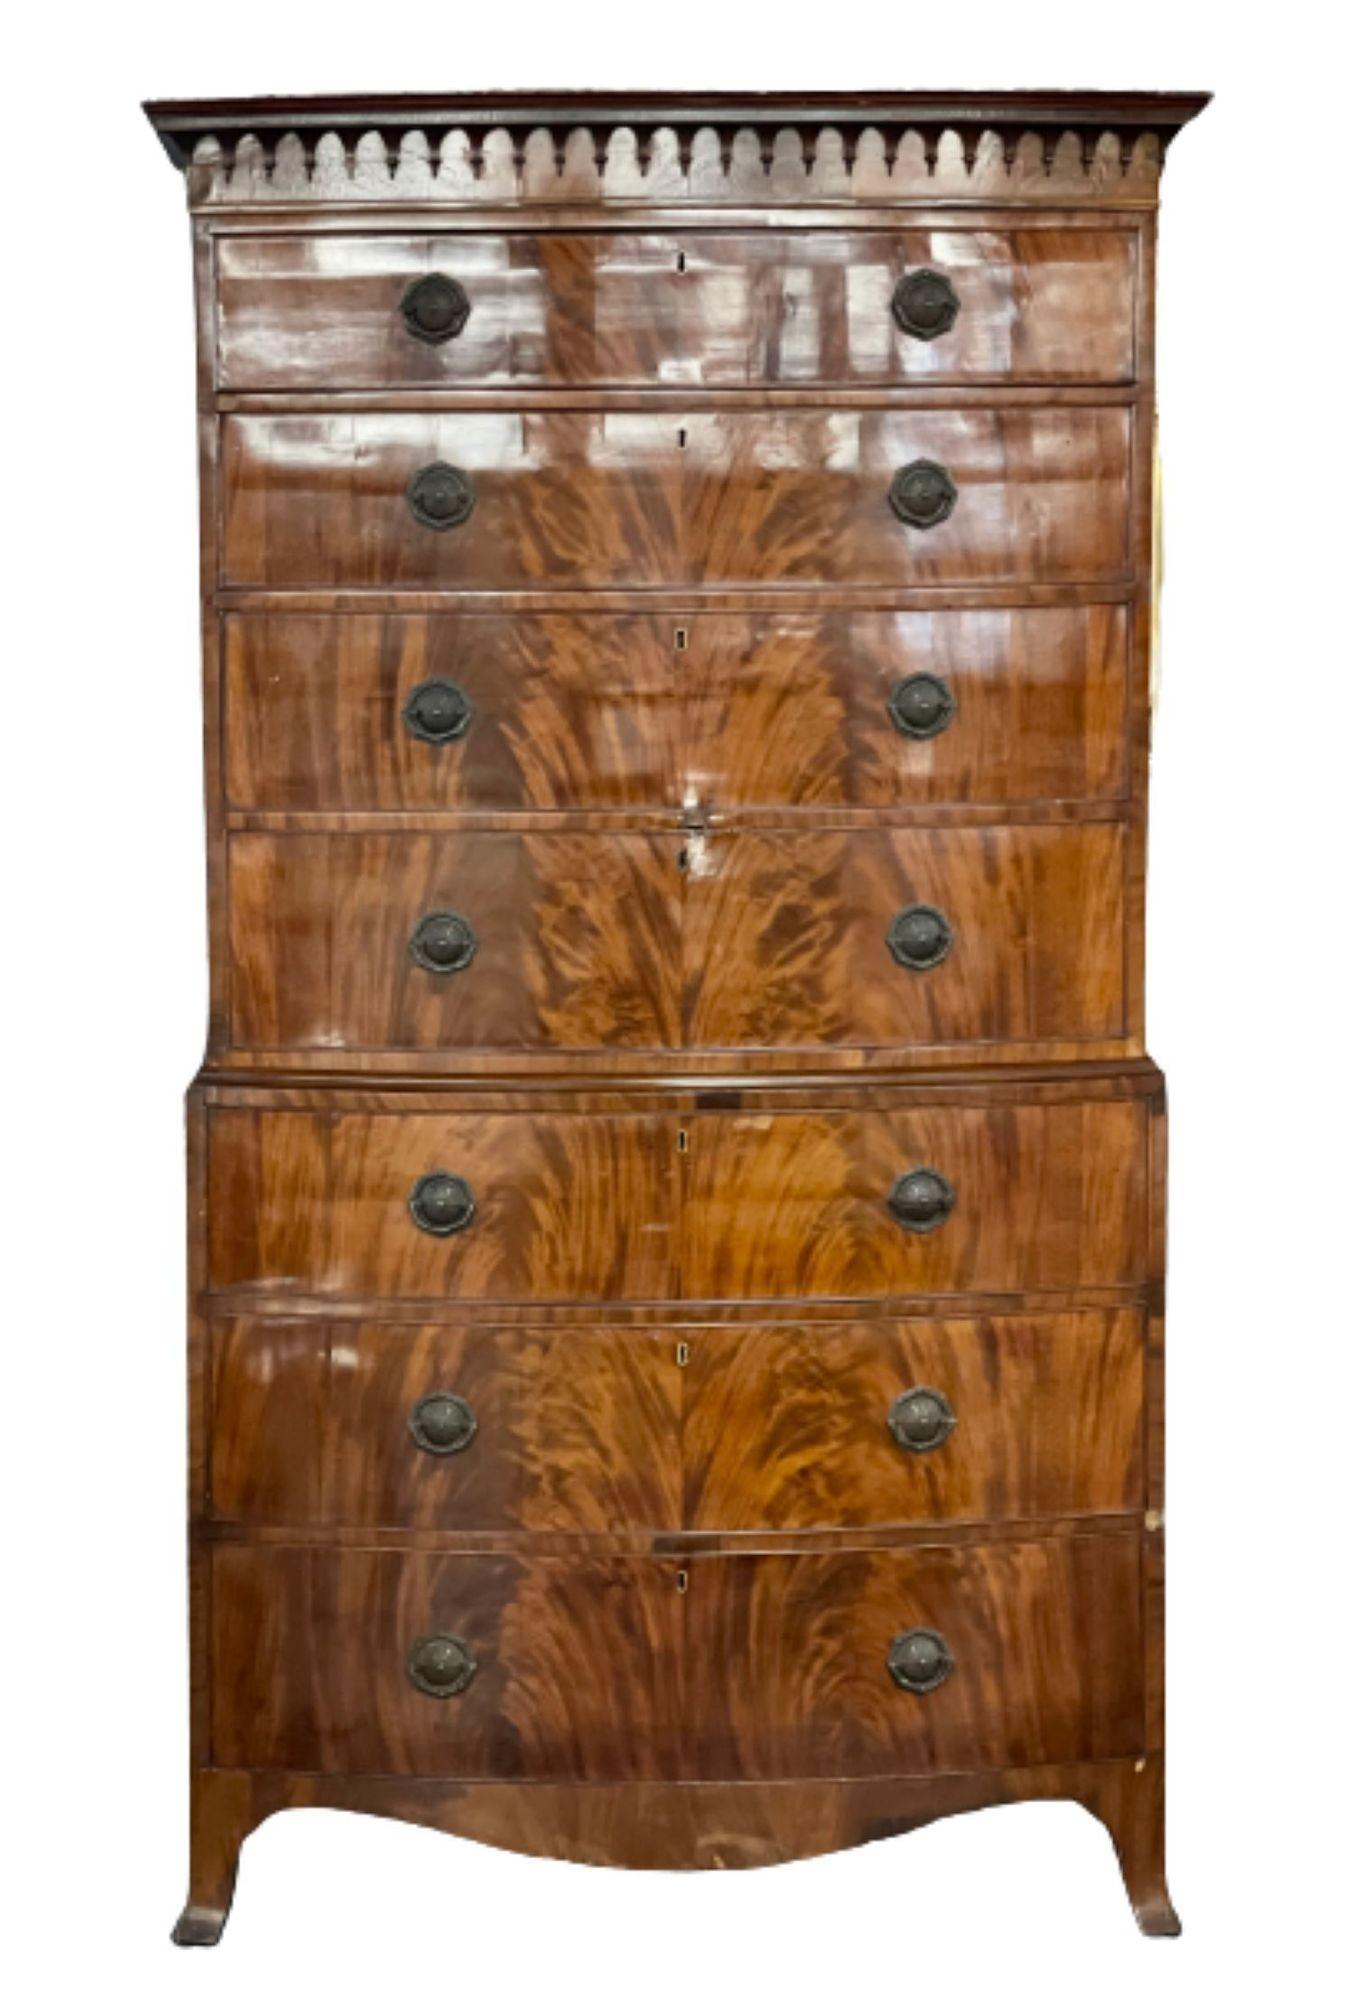 19th century late george III Mahogany bowfront chest on chest
 
A flame Mahogany chest on chest, late 19th century having a lower case supporting an upper chest both having grauduating drawers with original pulls. The chest maintaining its